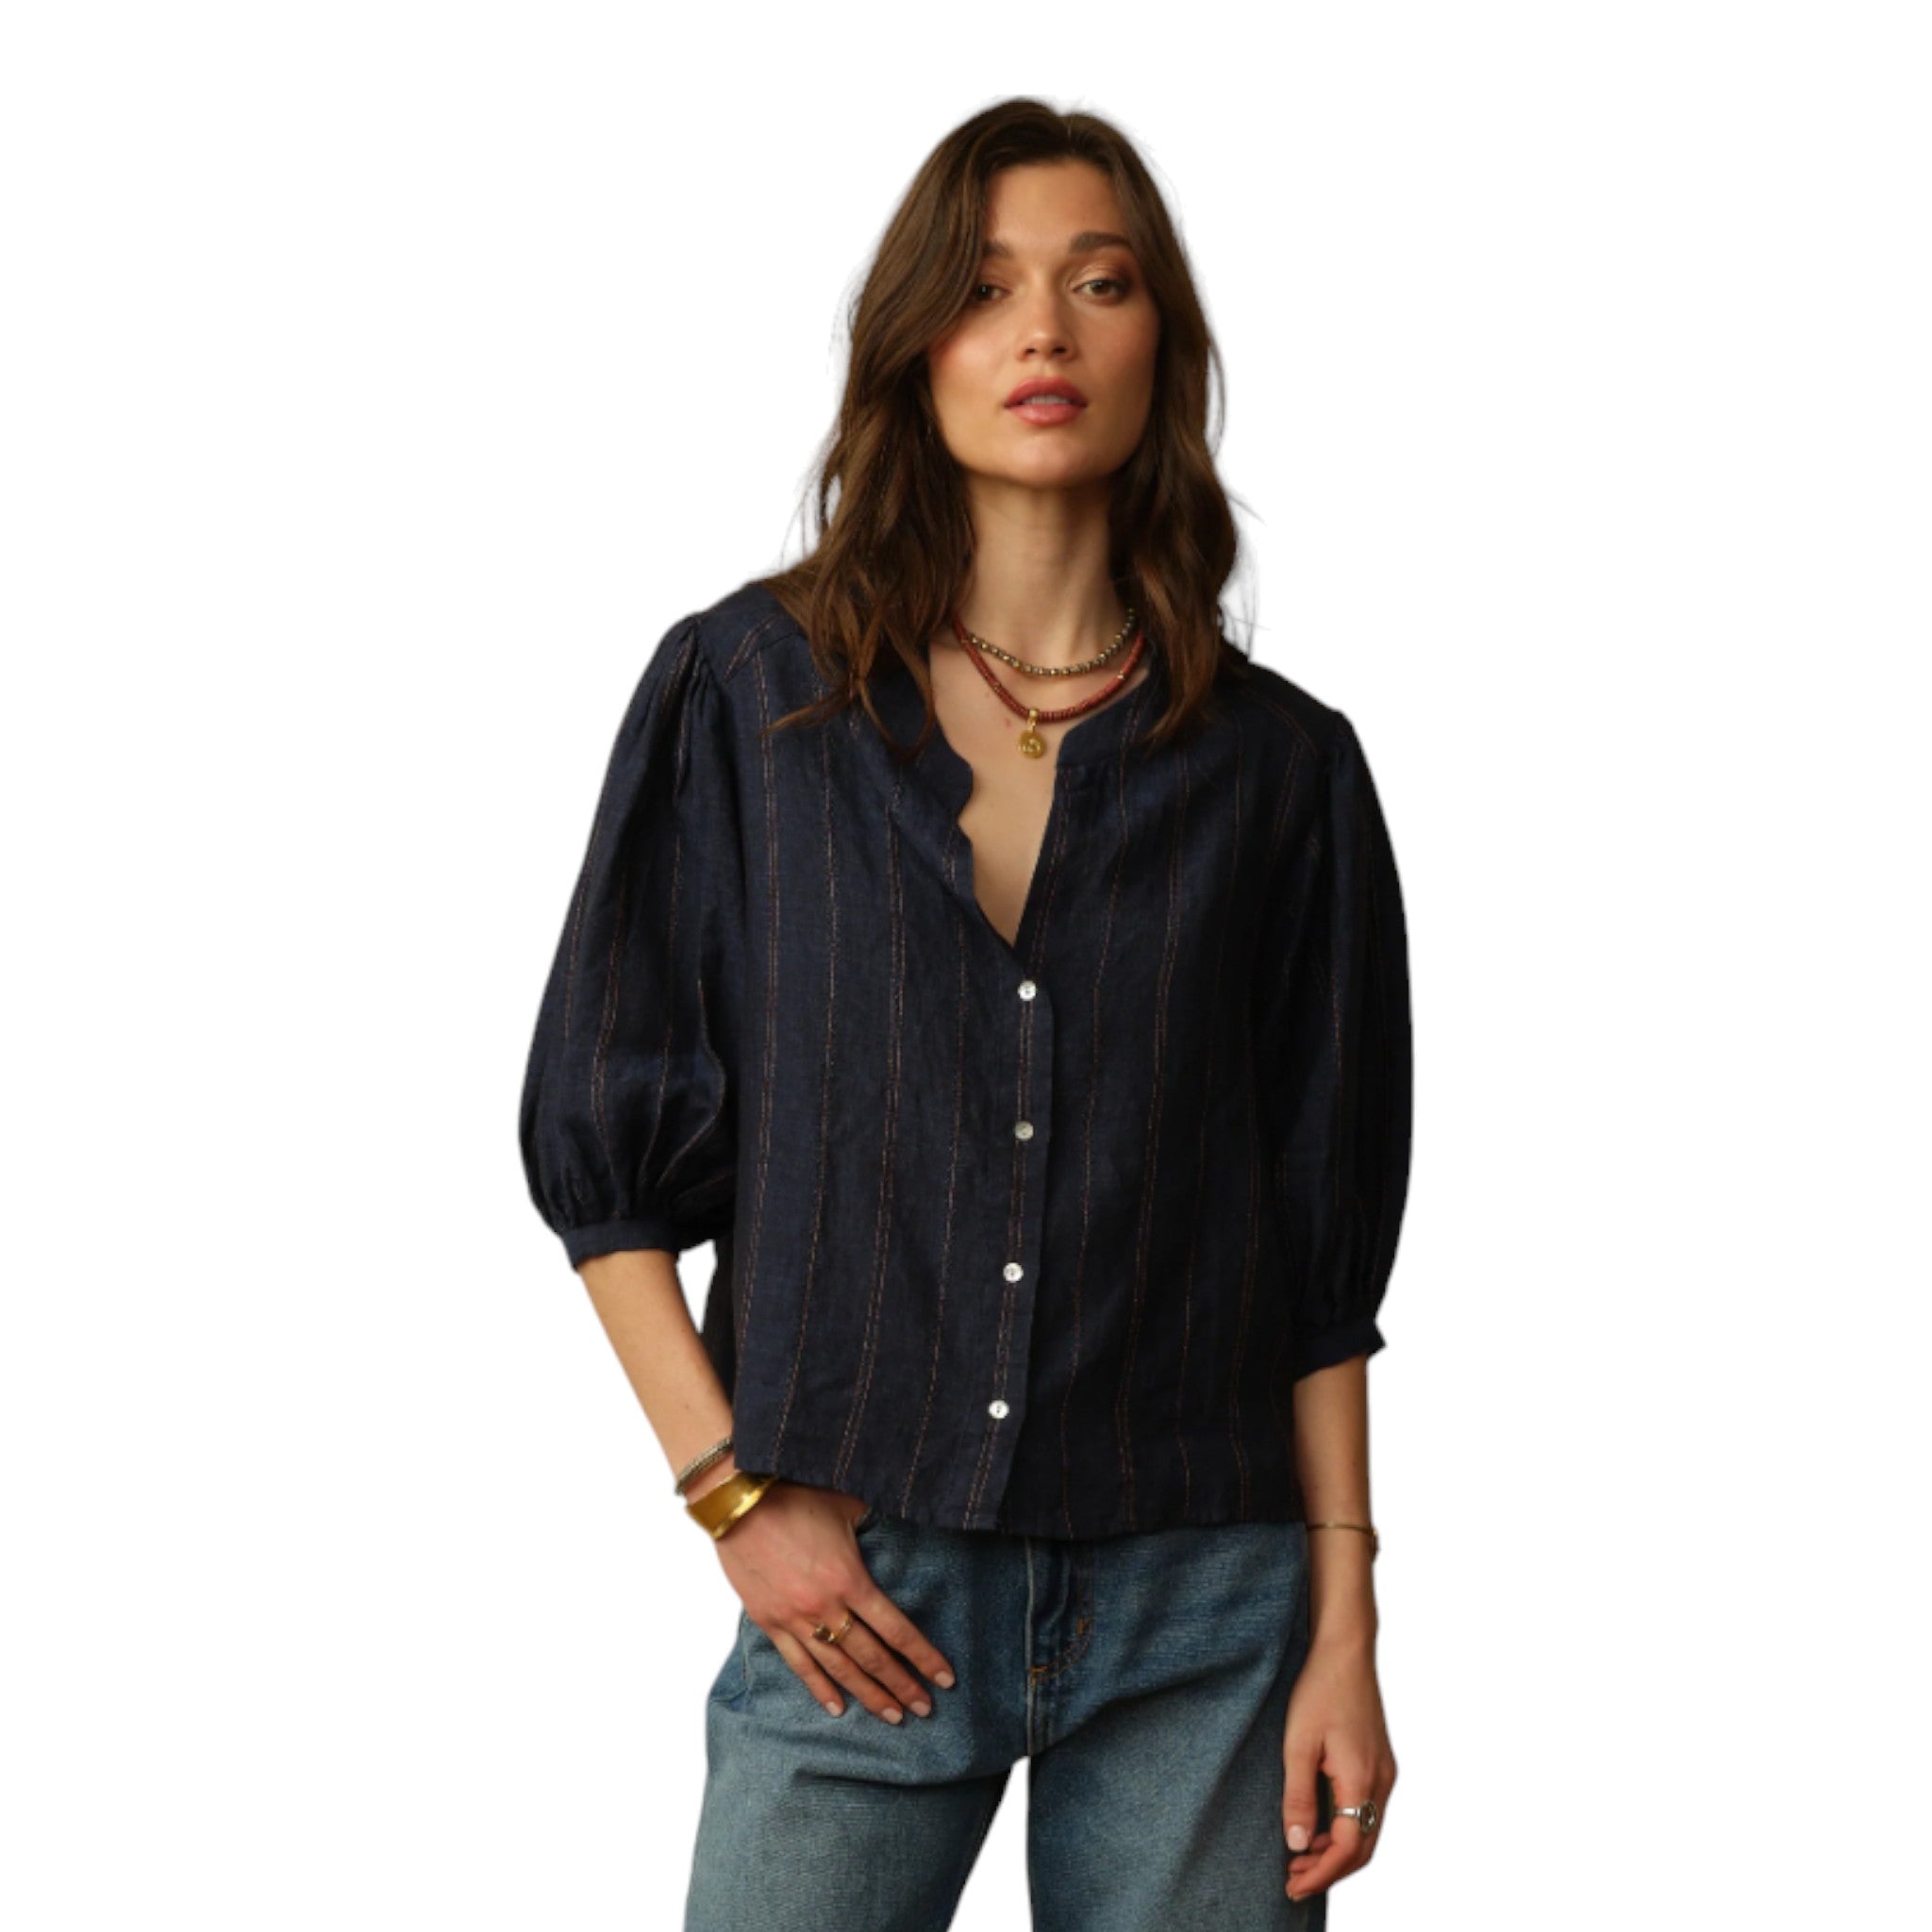 dark denim colored button up linen blouse with puff 3 quarter sleeves with a vertical brown stripe detailing